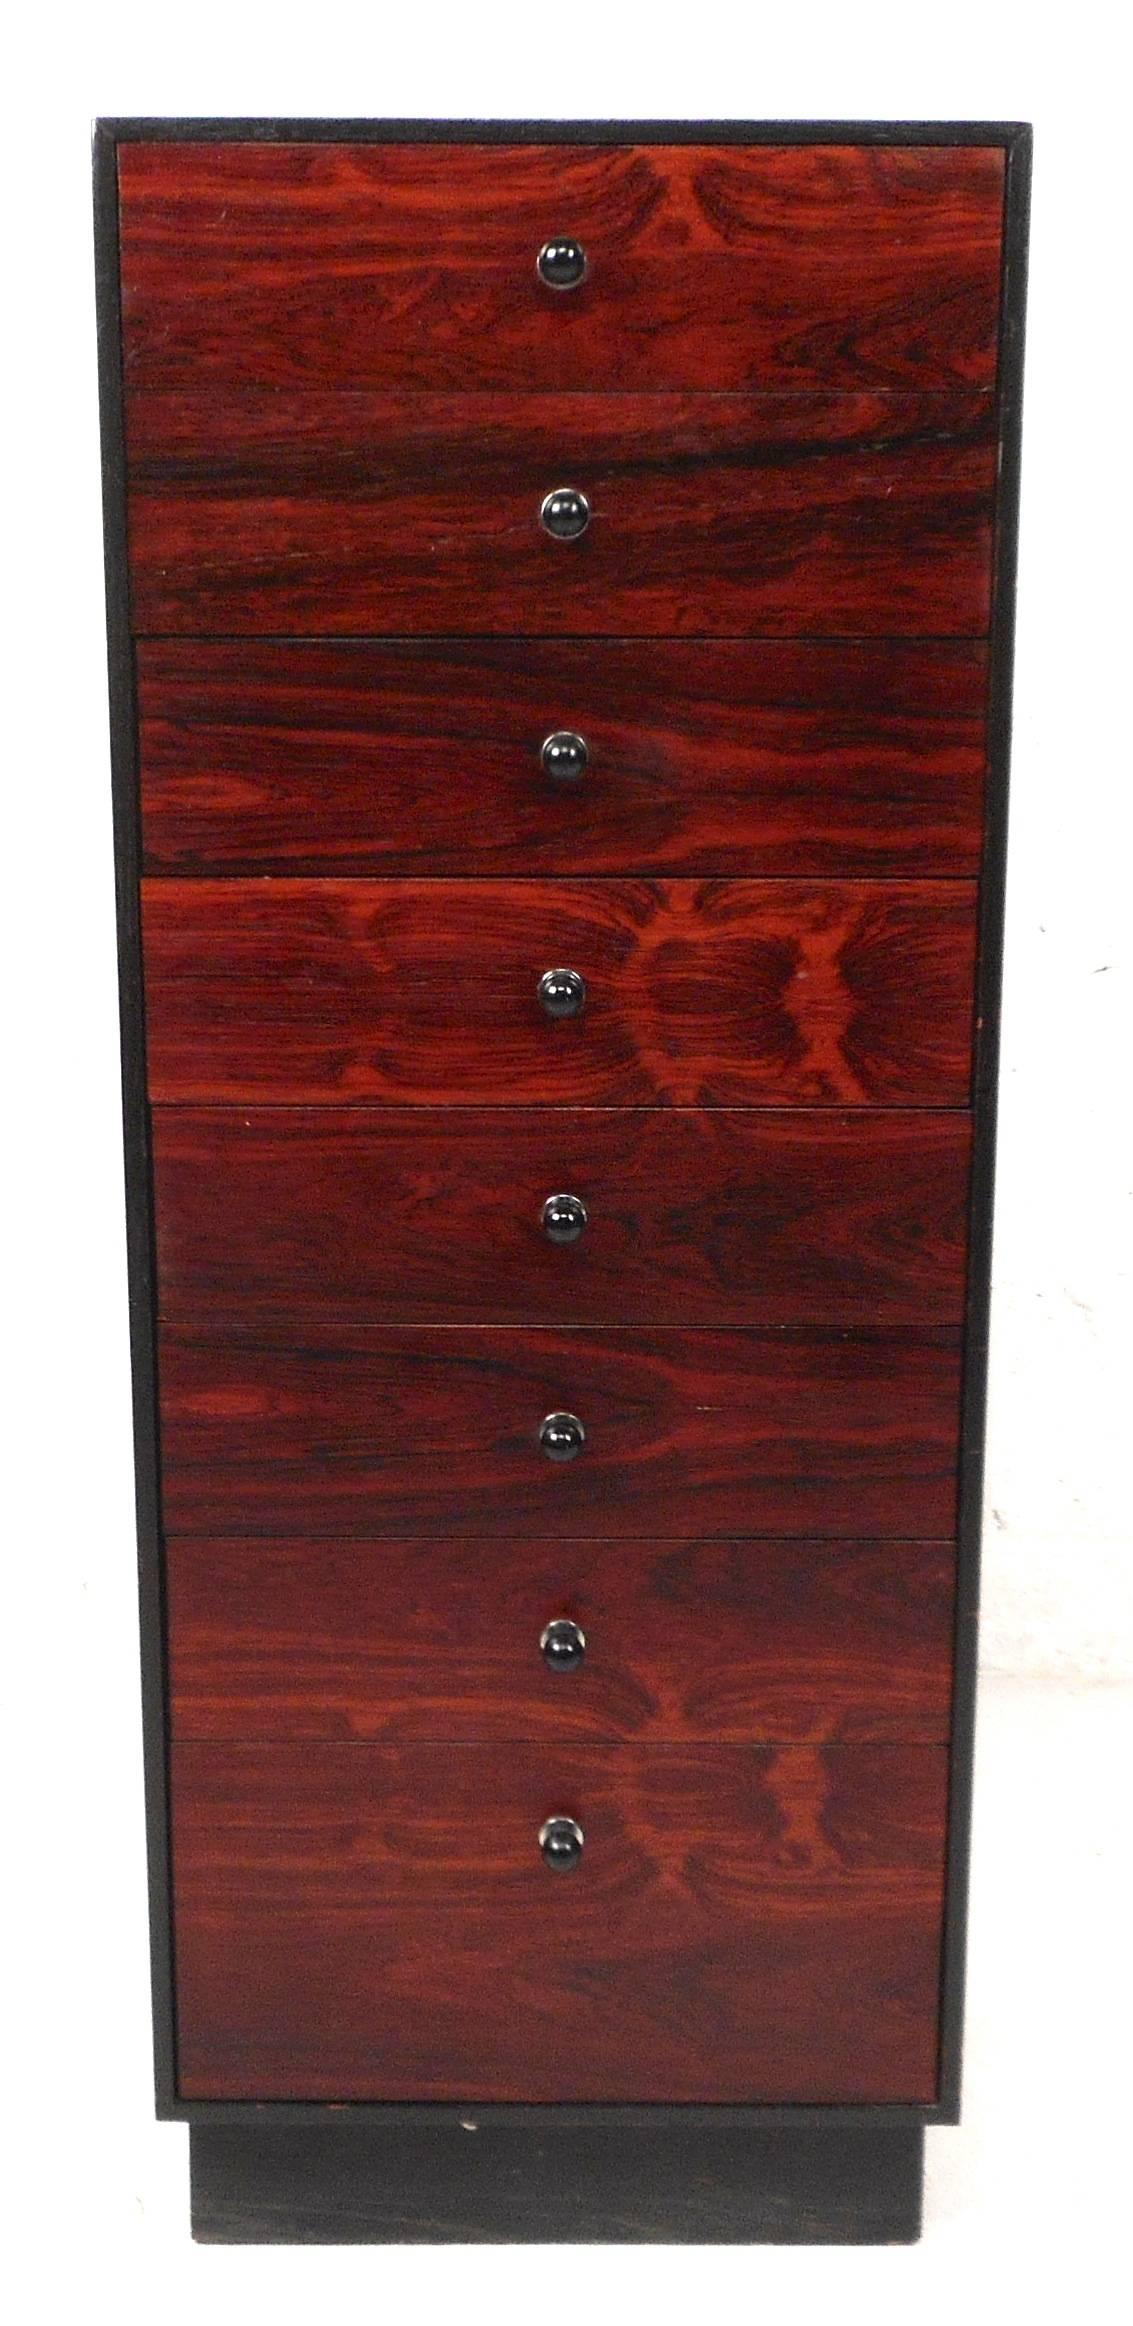 Stunning vintage modern jewelry cabinet features eight drawers with unique ebonized pulls. Sleek design with rosewood fronts on each drawer and an ebonized wood case. Quality craftsmanship with dovetail joints on each drawer making it the perfect